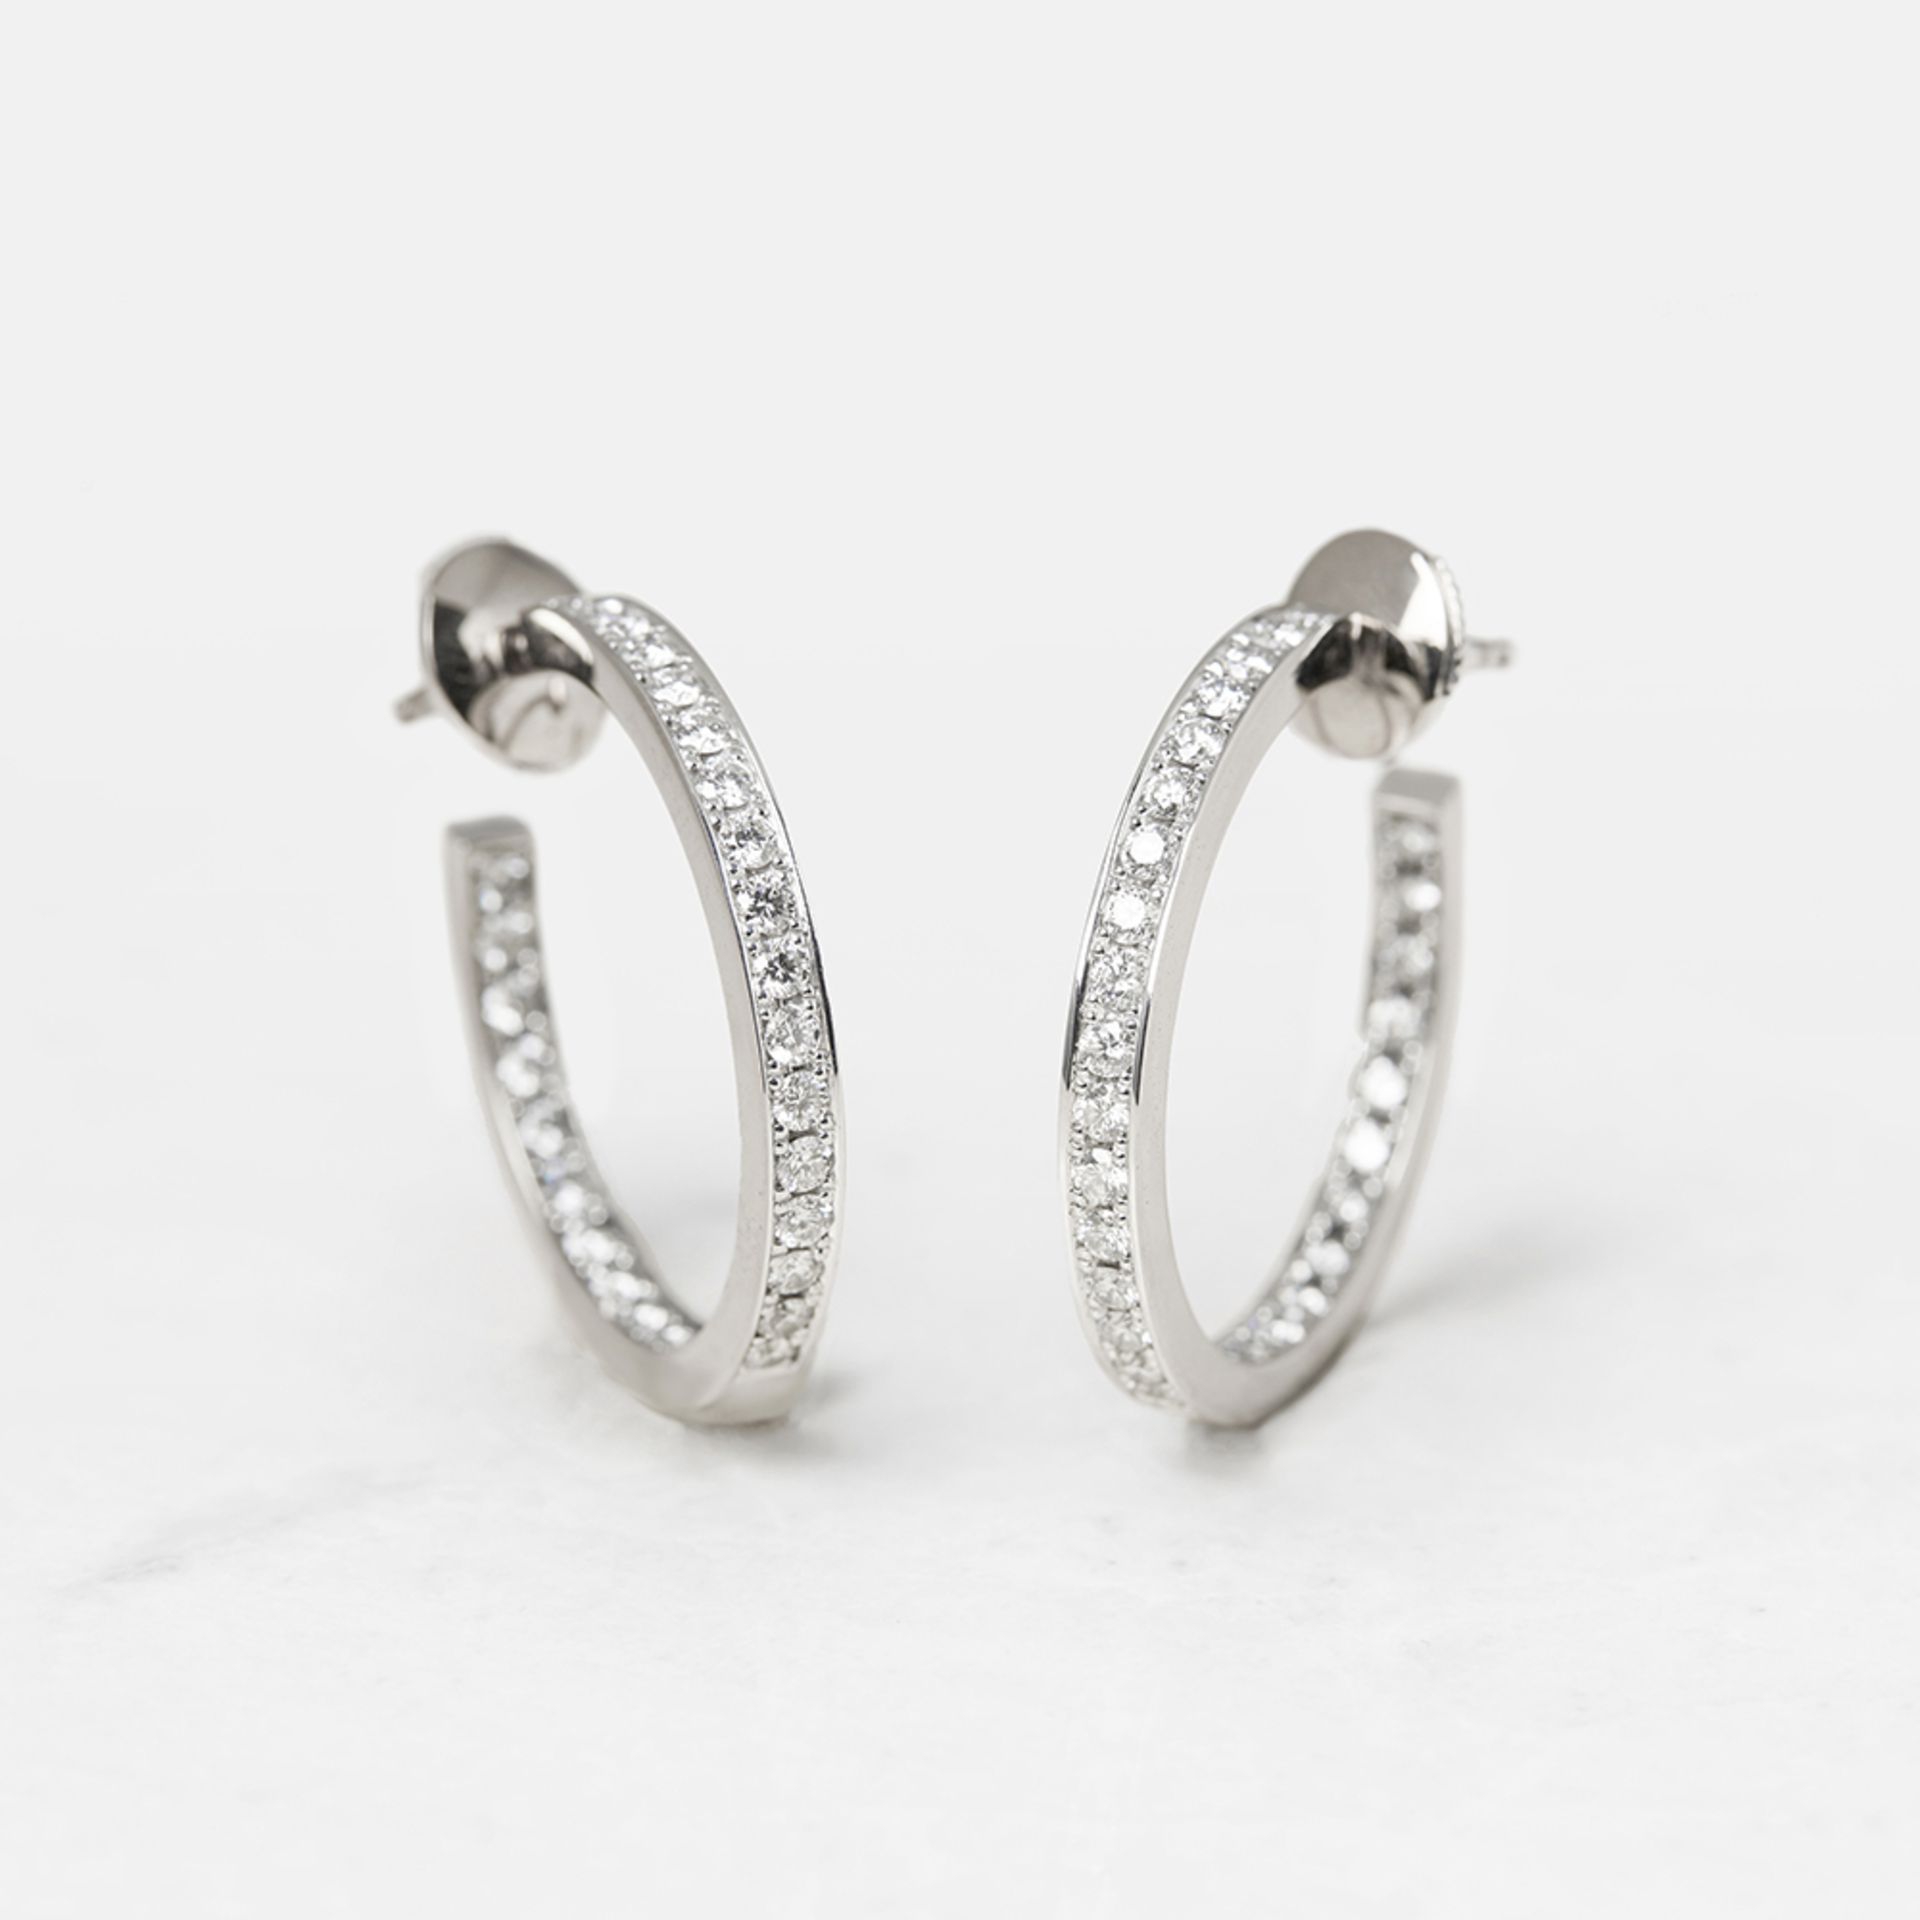 Cartier 18k White Gold 1.20ct Diamond Inside Out Hoop Earrings - Image 6 of 12